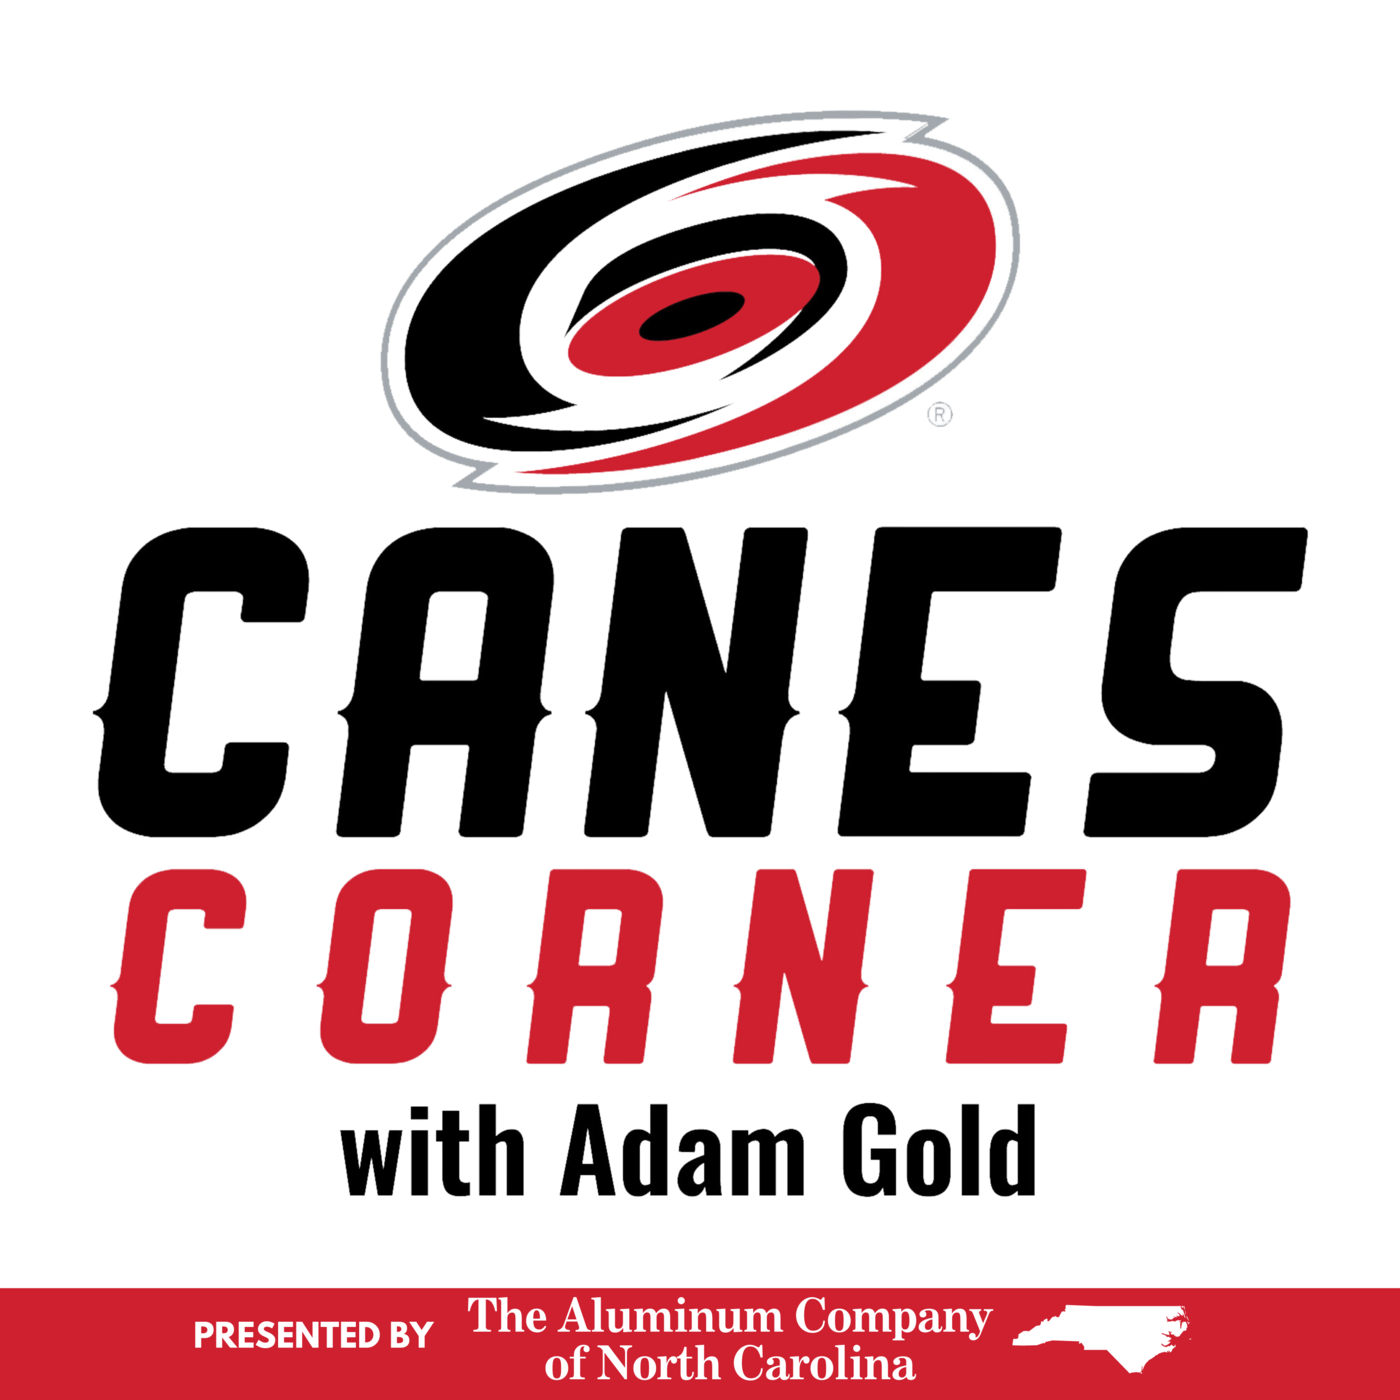 Andersen carries Canes to 2-1 win over Leafs